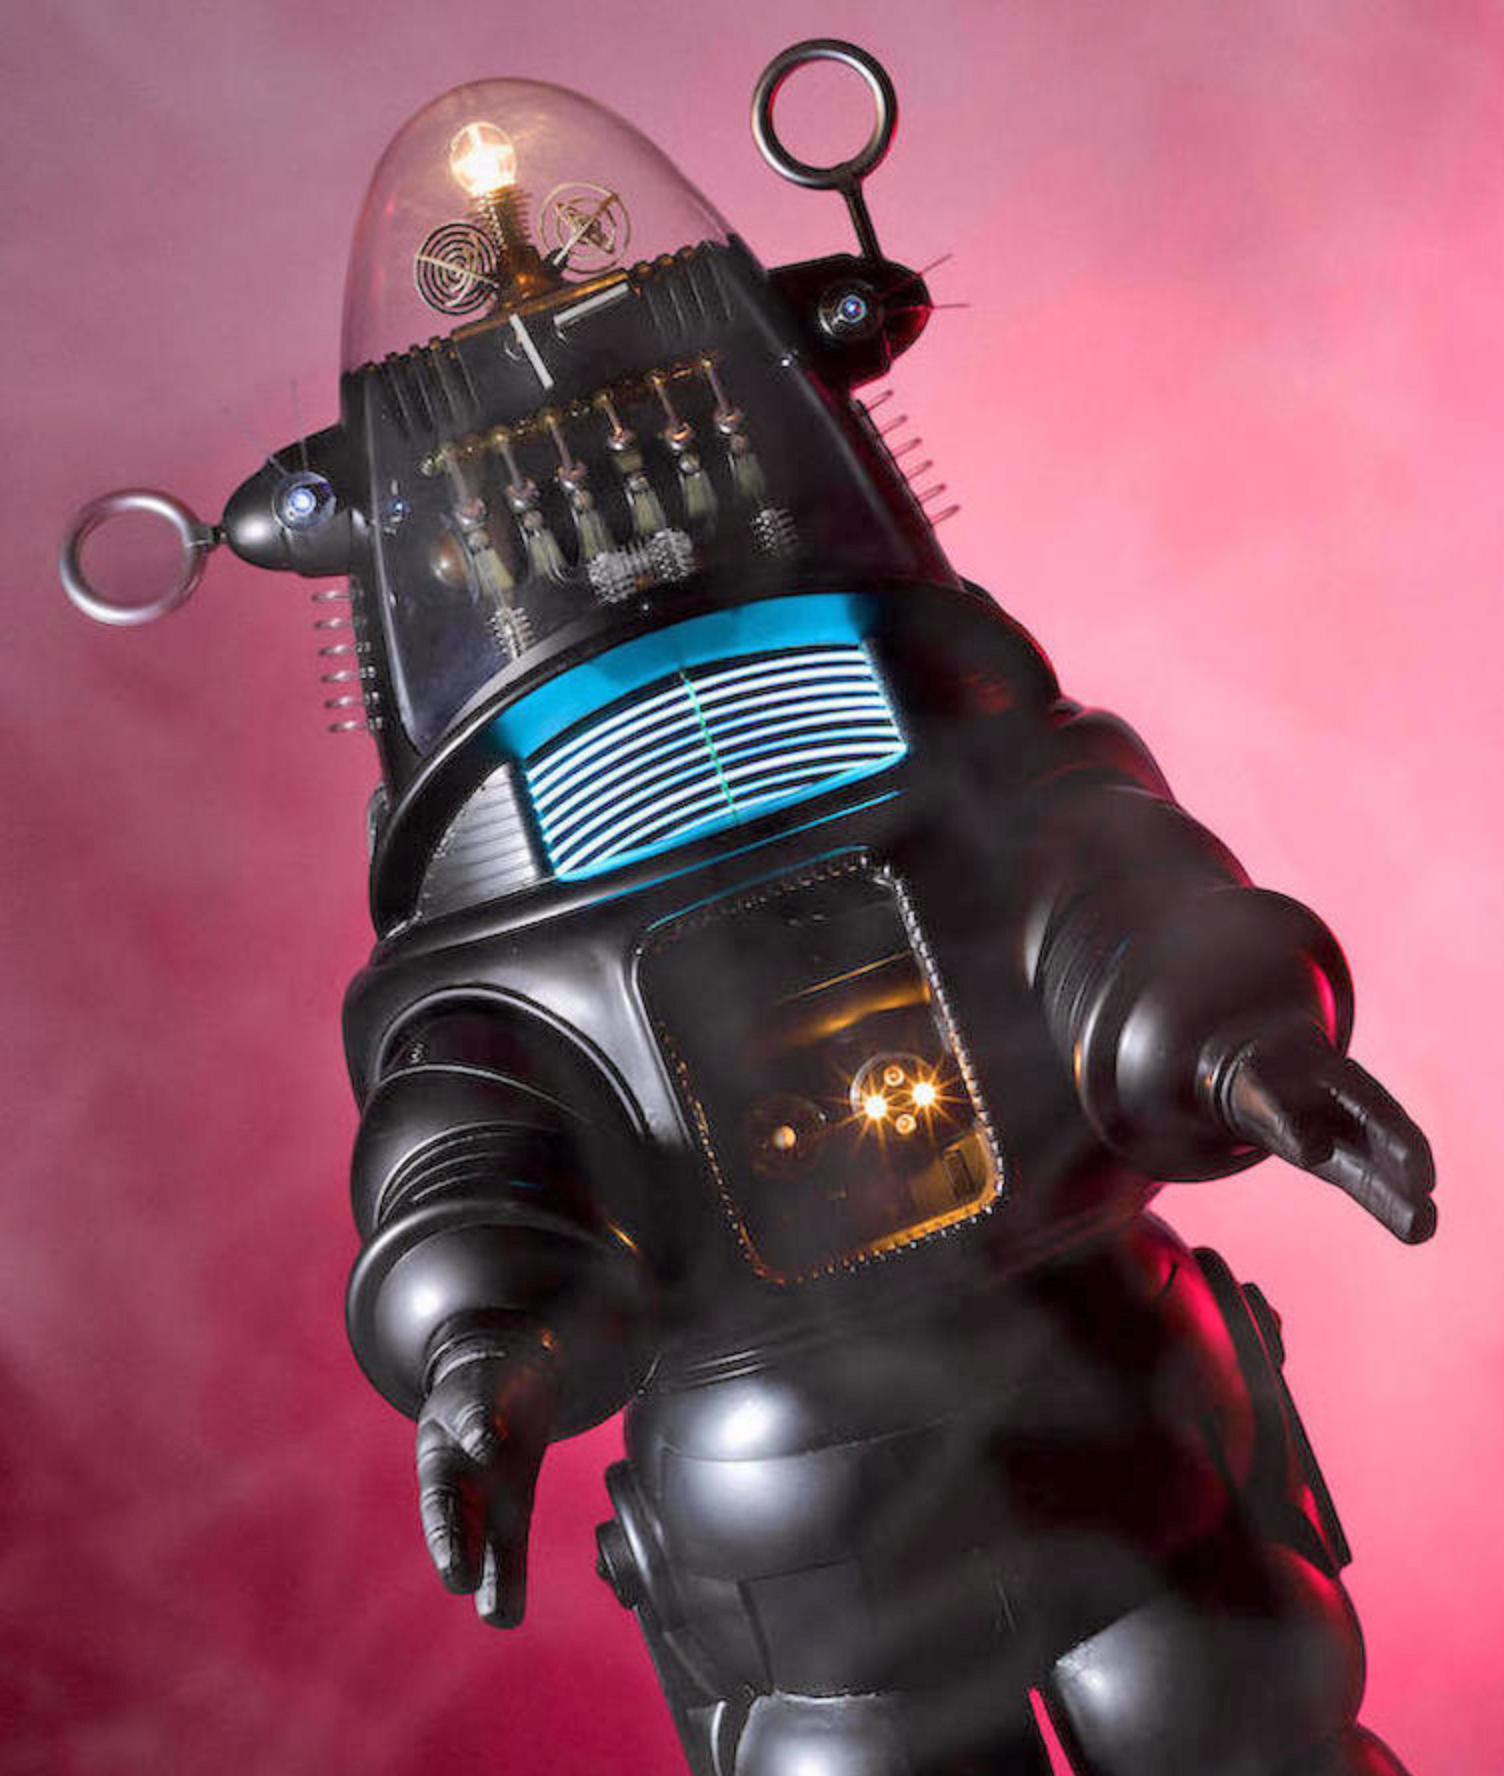 One Of The Most Famous Movie Robots Of All Time Just Sold For $7.1 Million